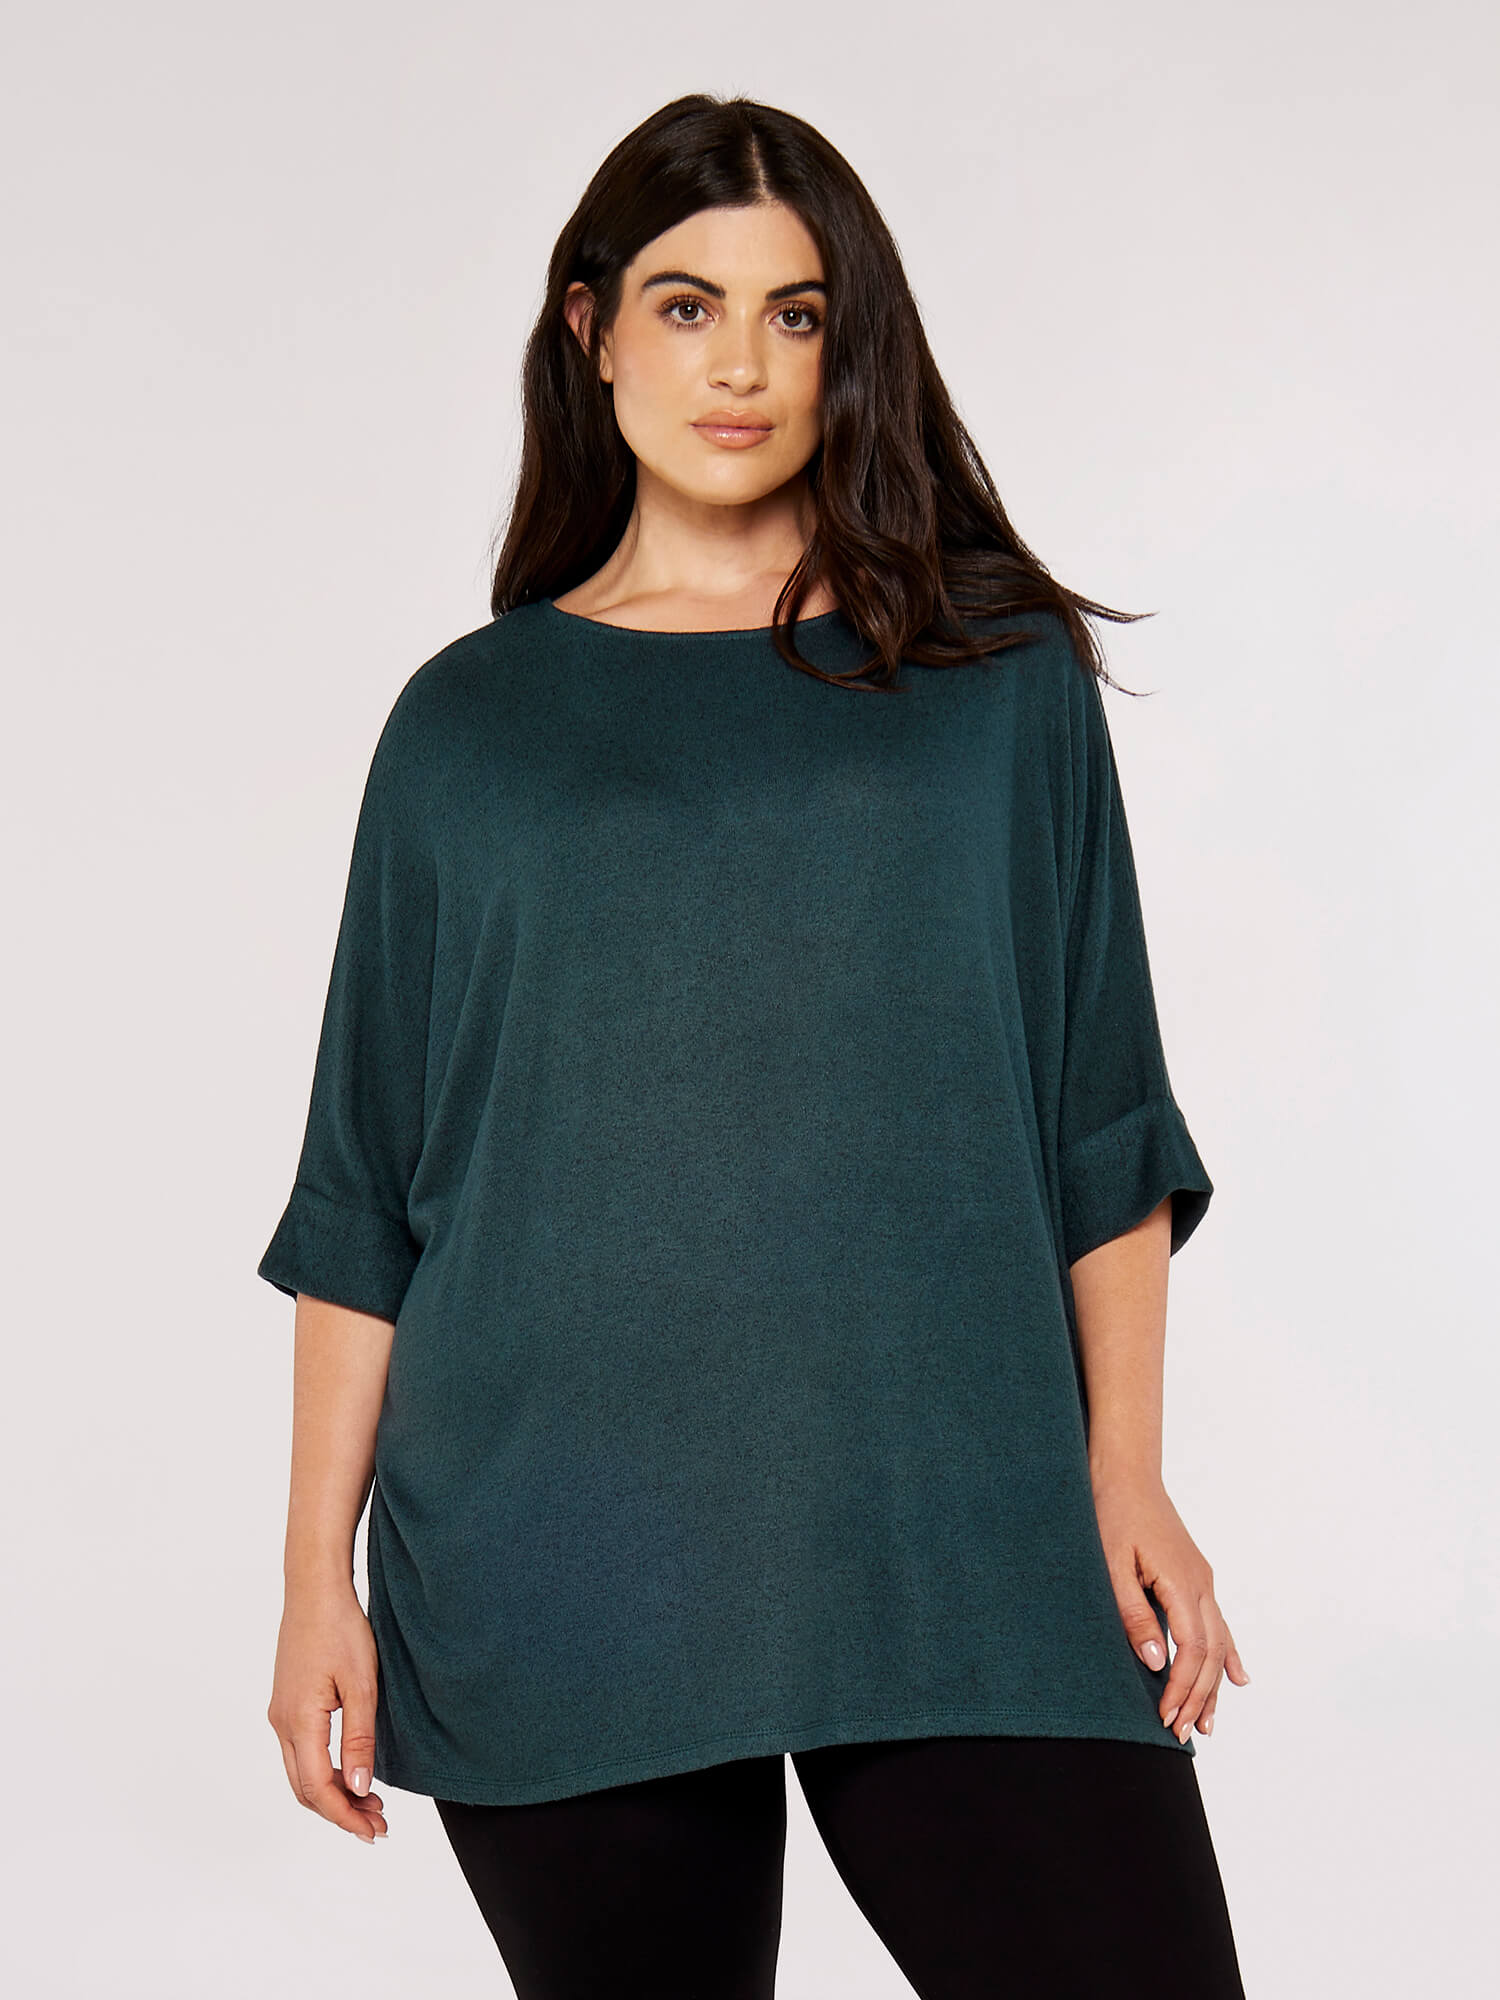 Curve Batwing Top | Apricot Clothing